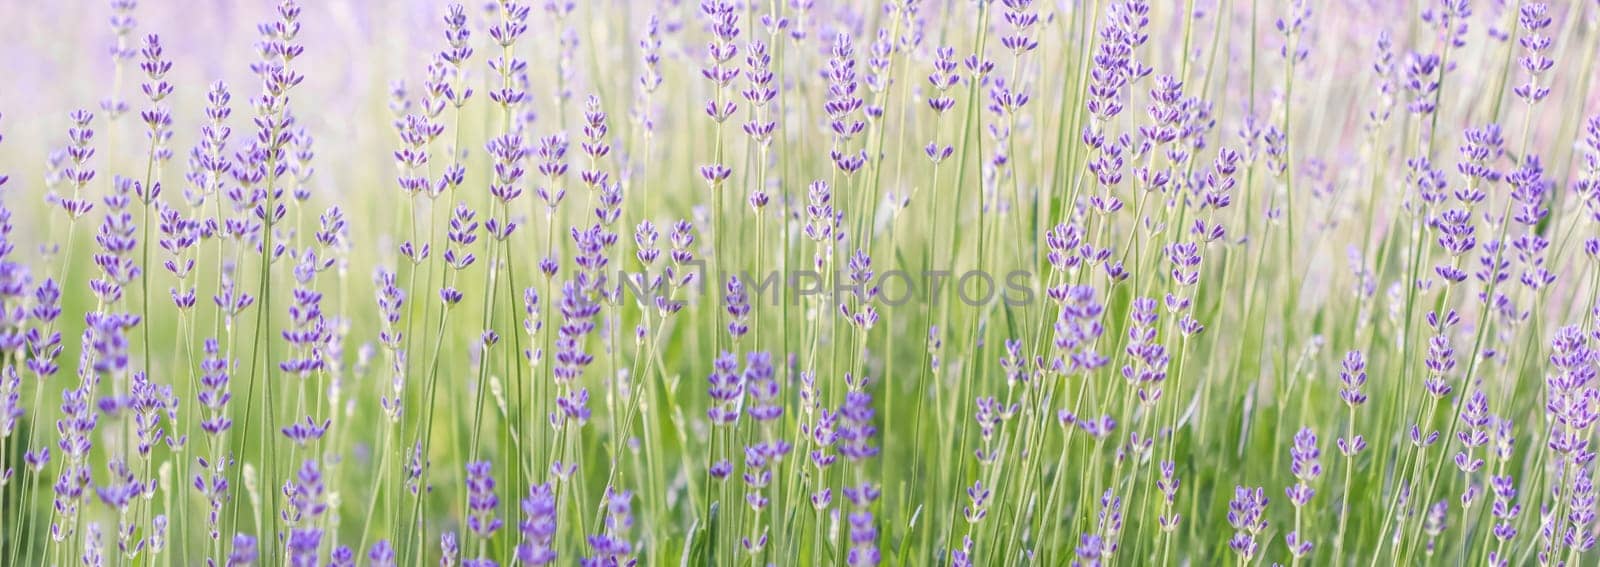 Lavender flowers blooming in the lavender field. Soft focus. Floral backgrond